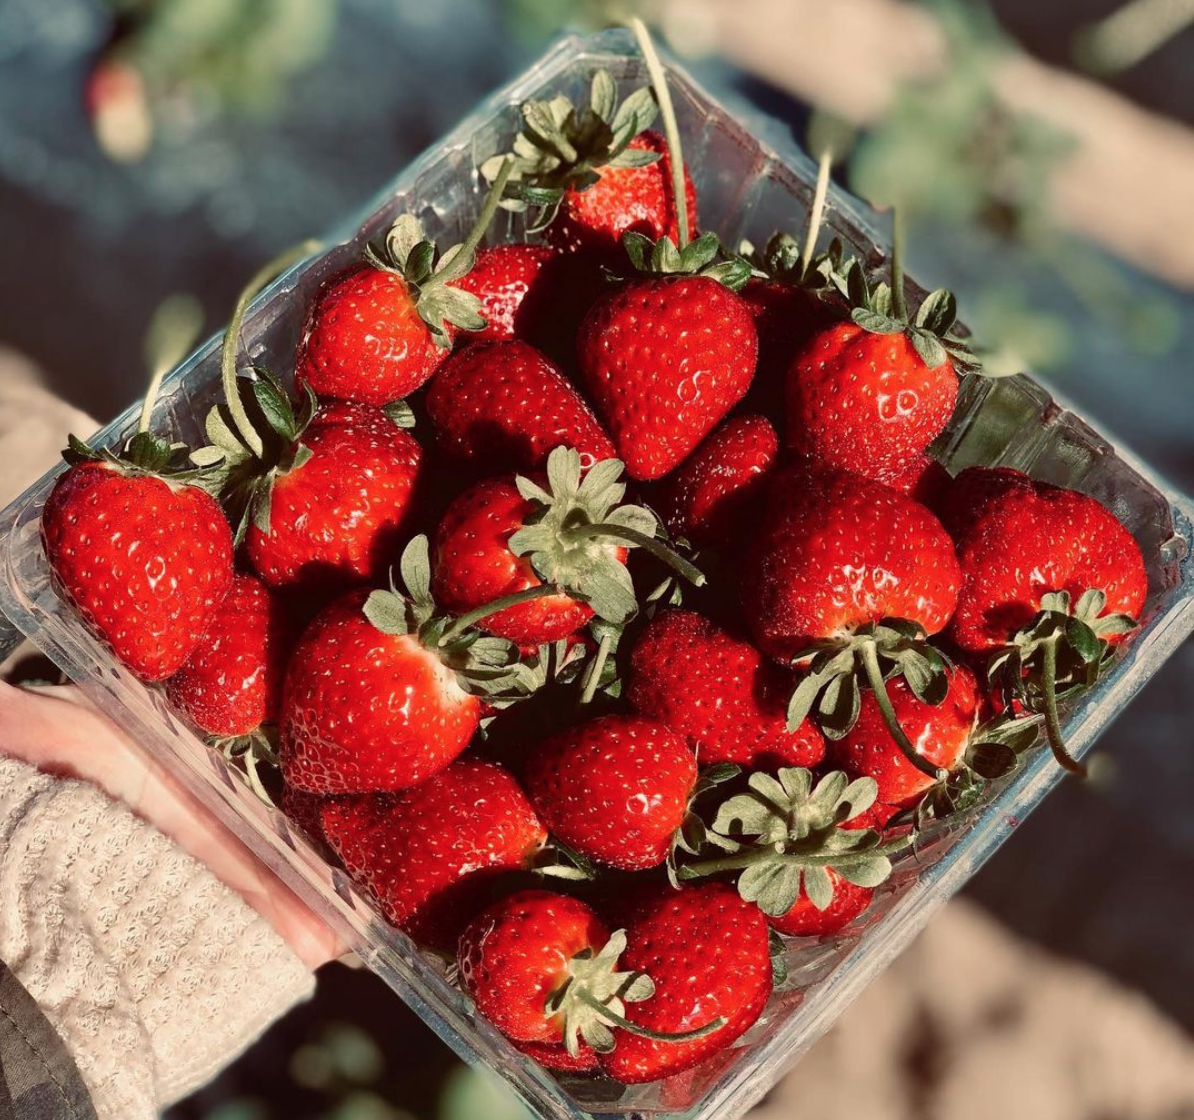 Strawberry picking in Orlando: image of a carton of fresh strawberries picked at Southern Hill Farms in Clermont, Florida